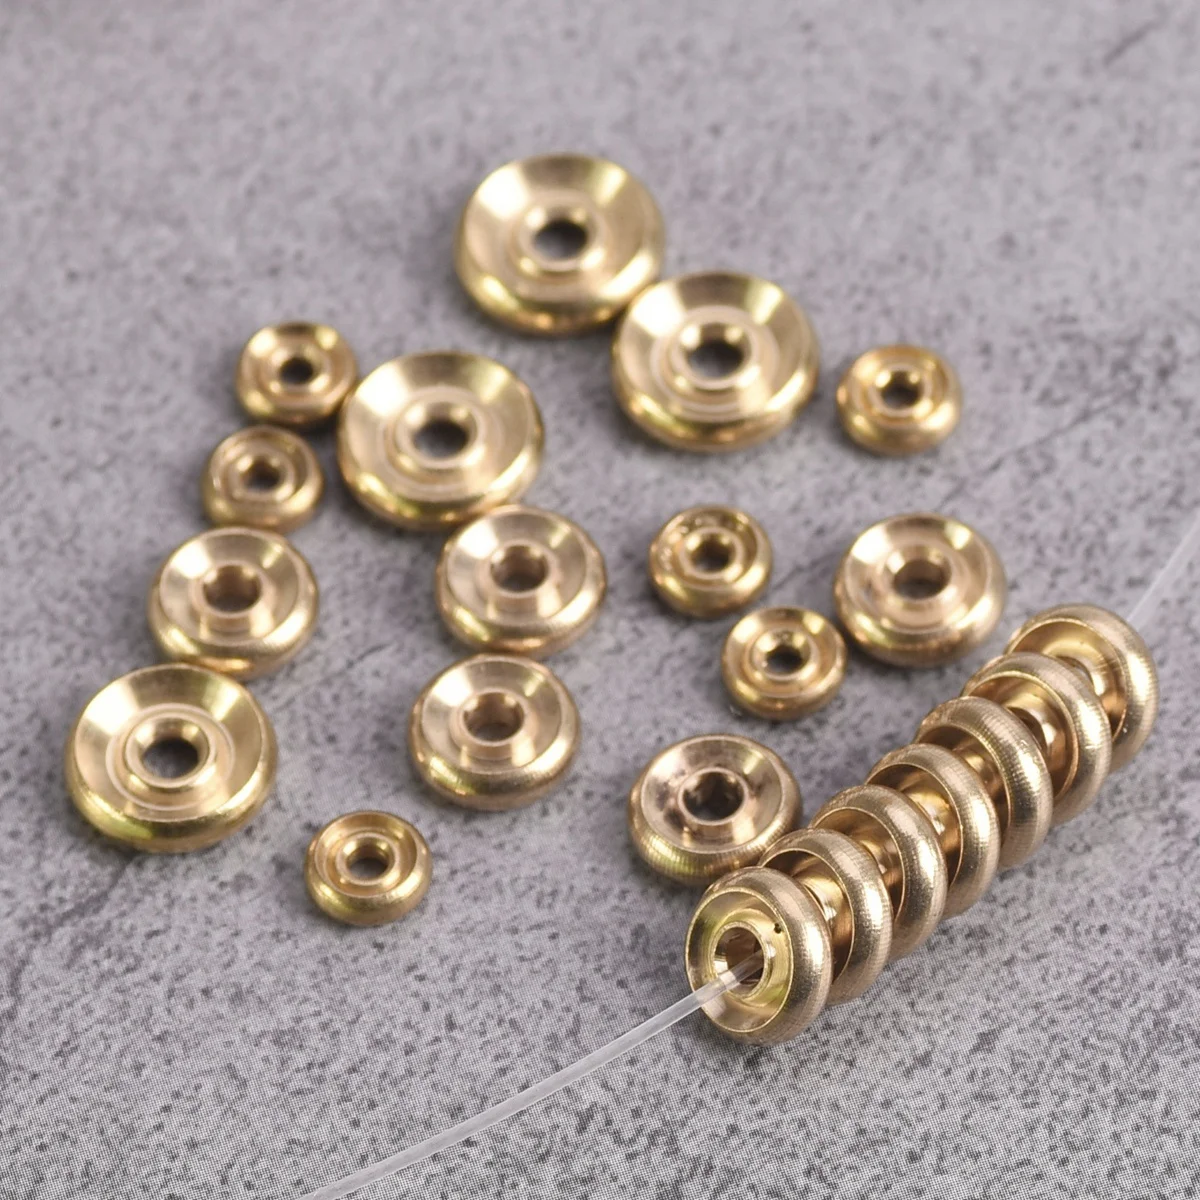 30pcs Flat Round Rondelle 6mm 8mm 10mm Solid Brass Metal Light Gold Color Loose Spacer Beads lot for Jewelry Making Findings 5 10pc m12 m14 m16 m18 m20 m22 m27 solid copper shim flat gasket rings seal plain spacer fastener